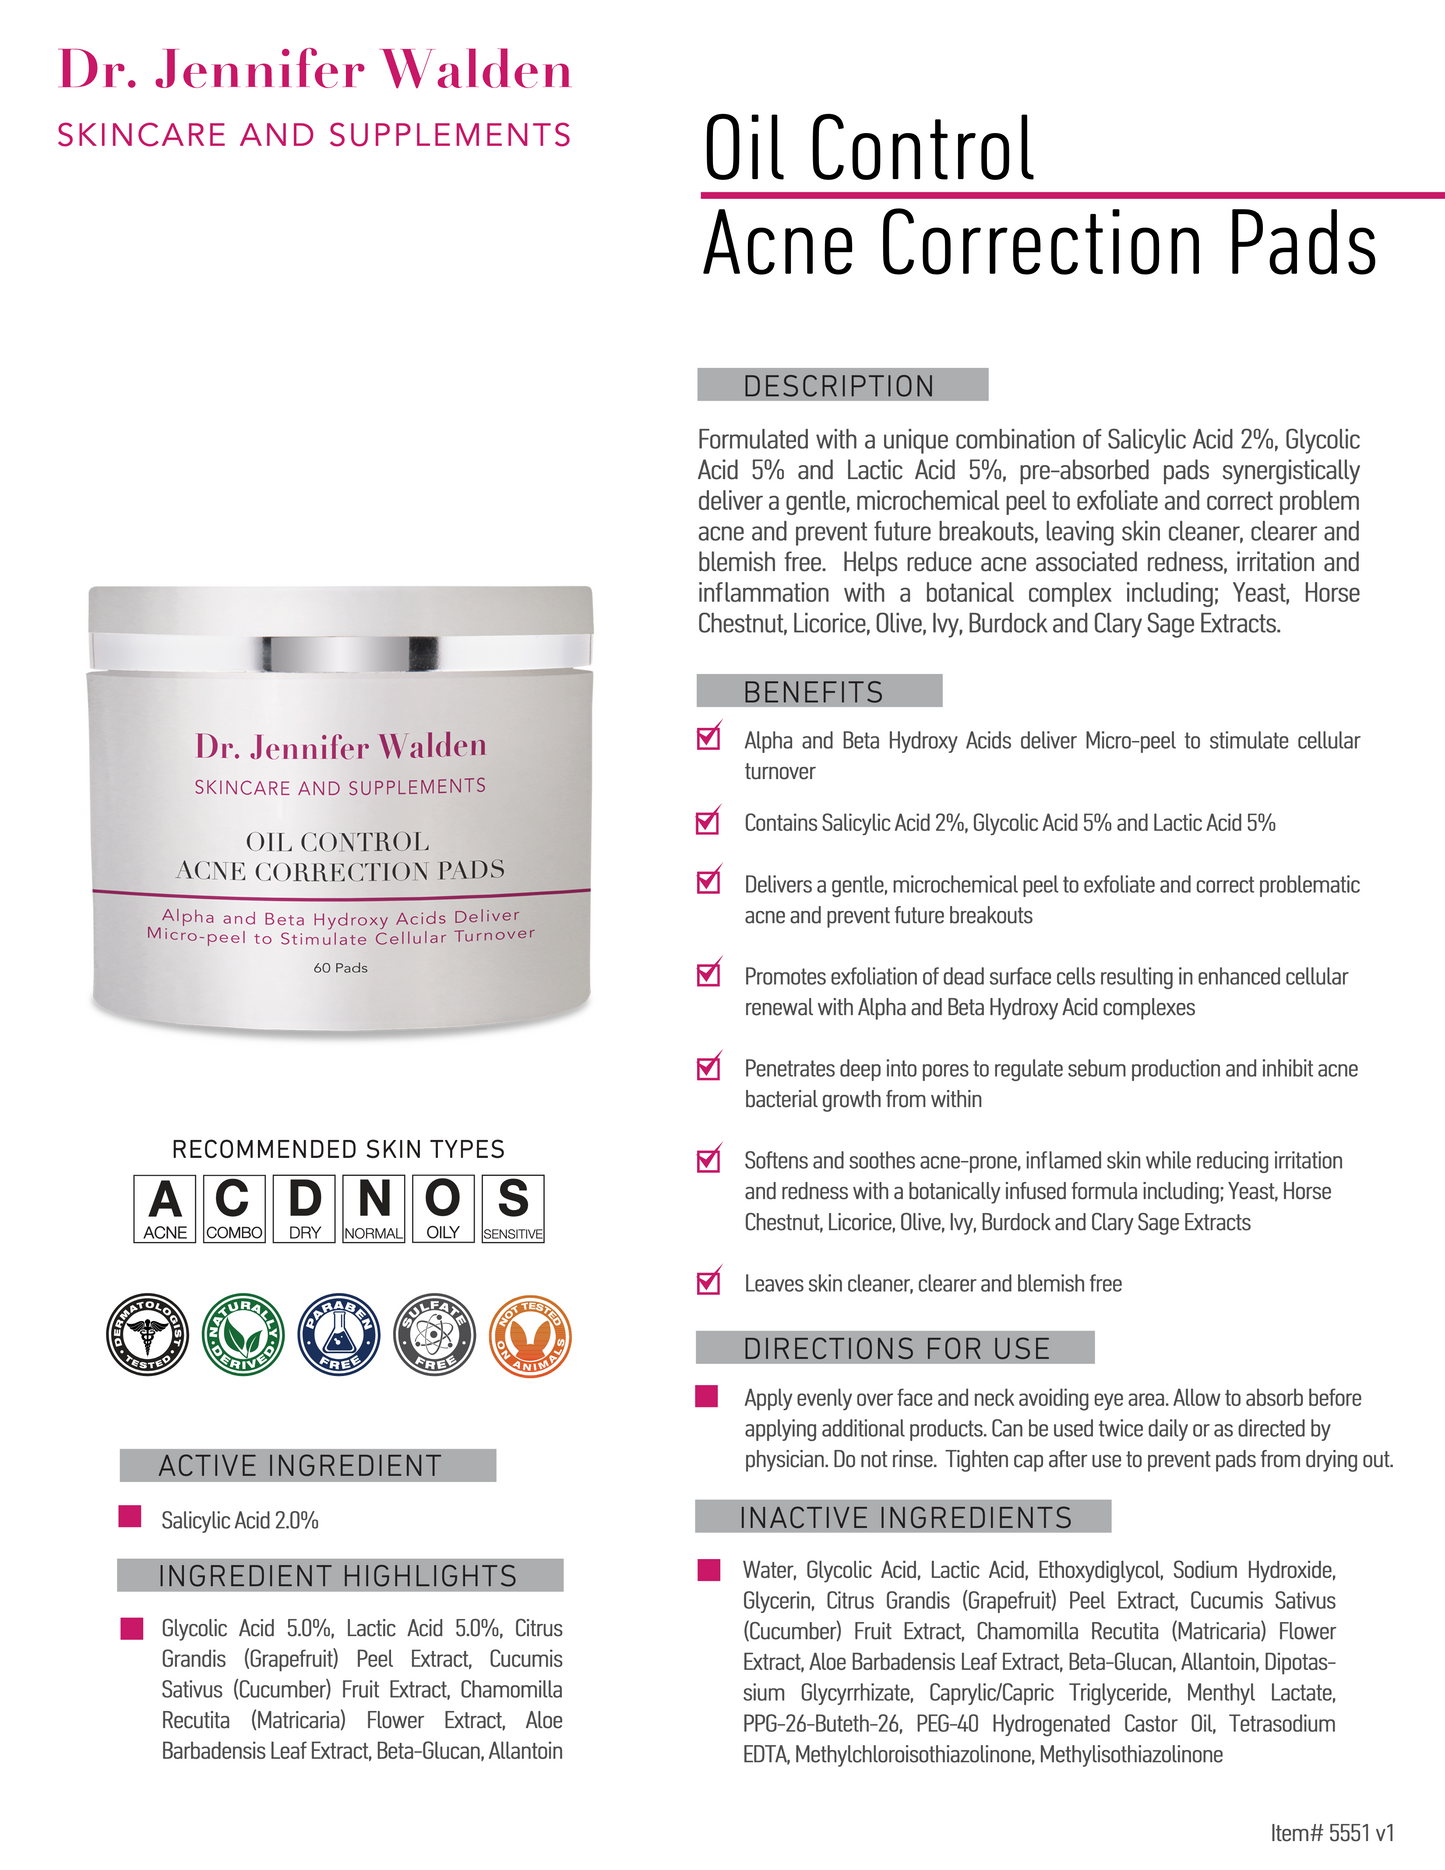 OIL CONTROL ACNE CORRECTION PADS-4